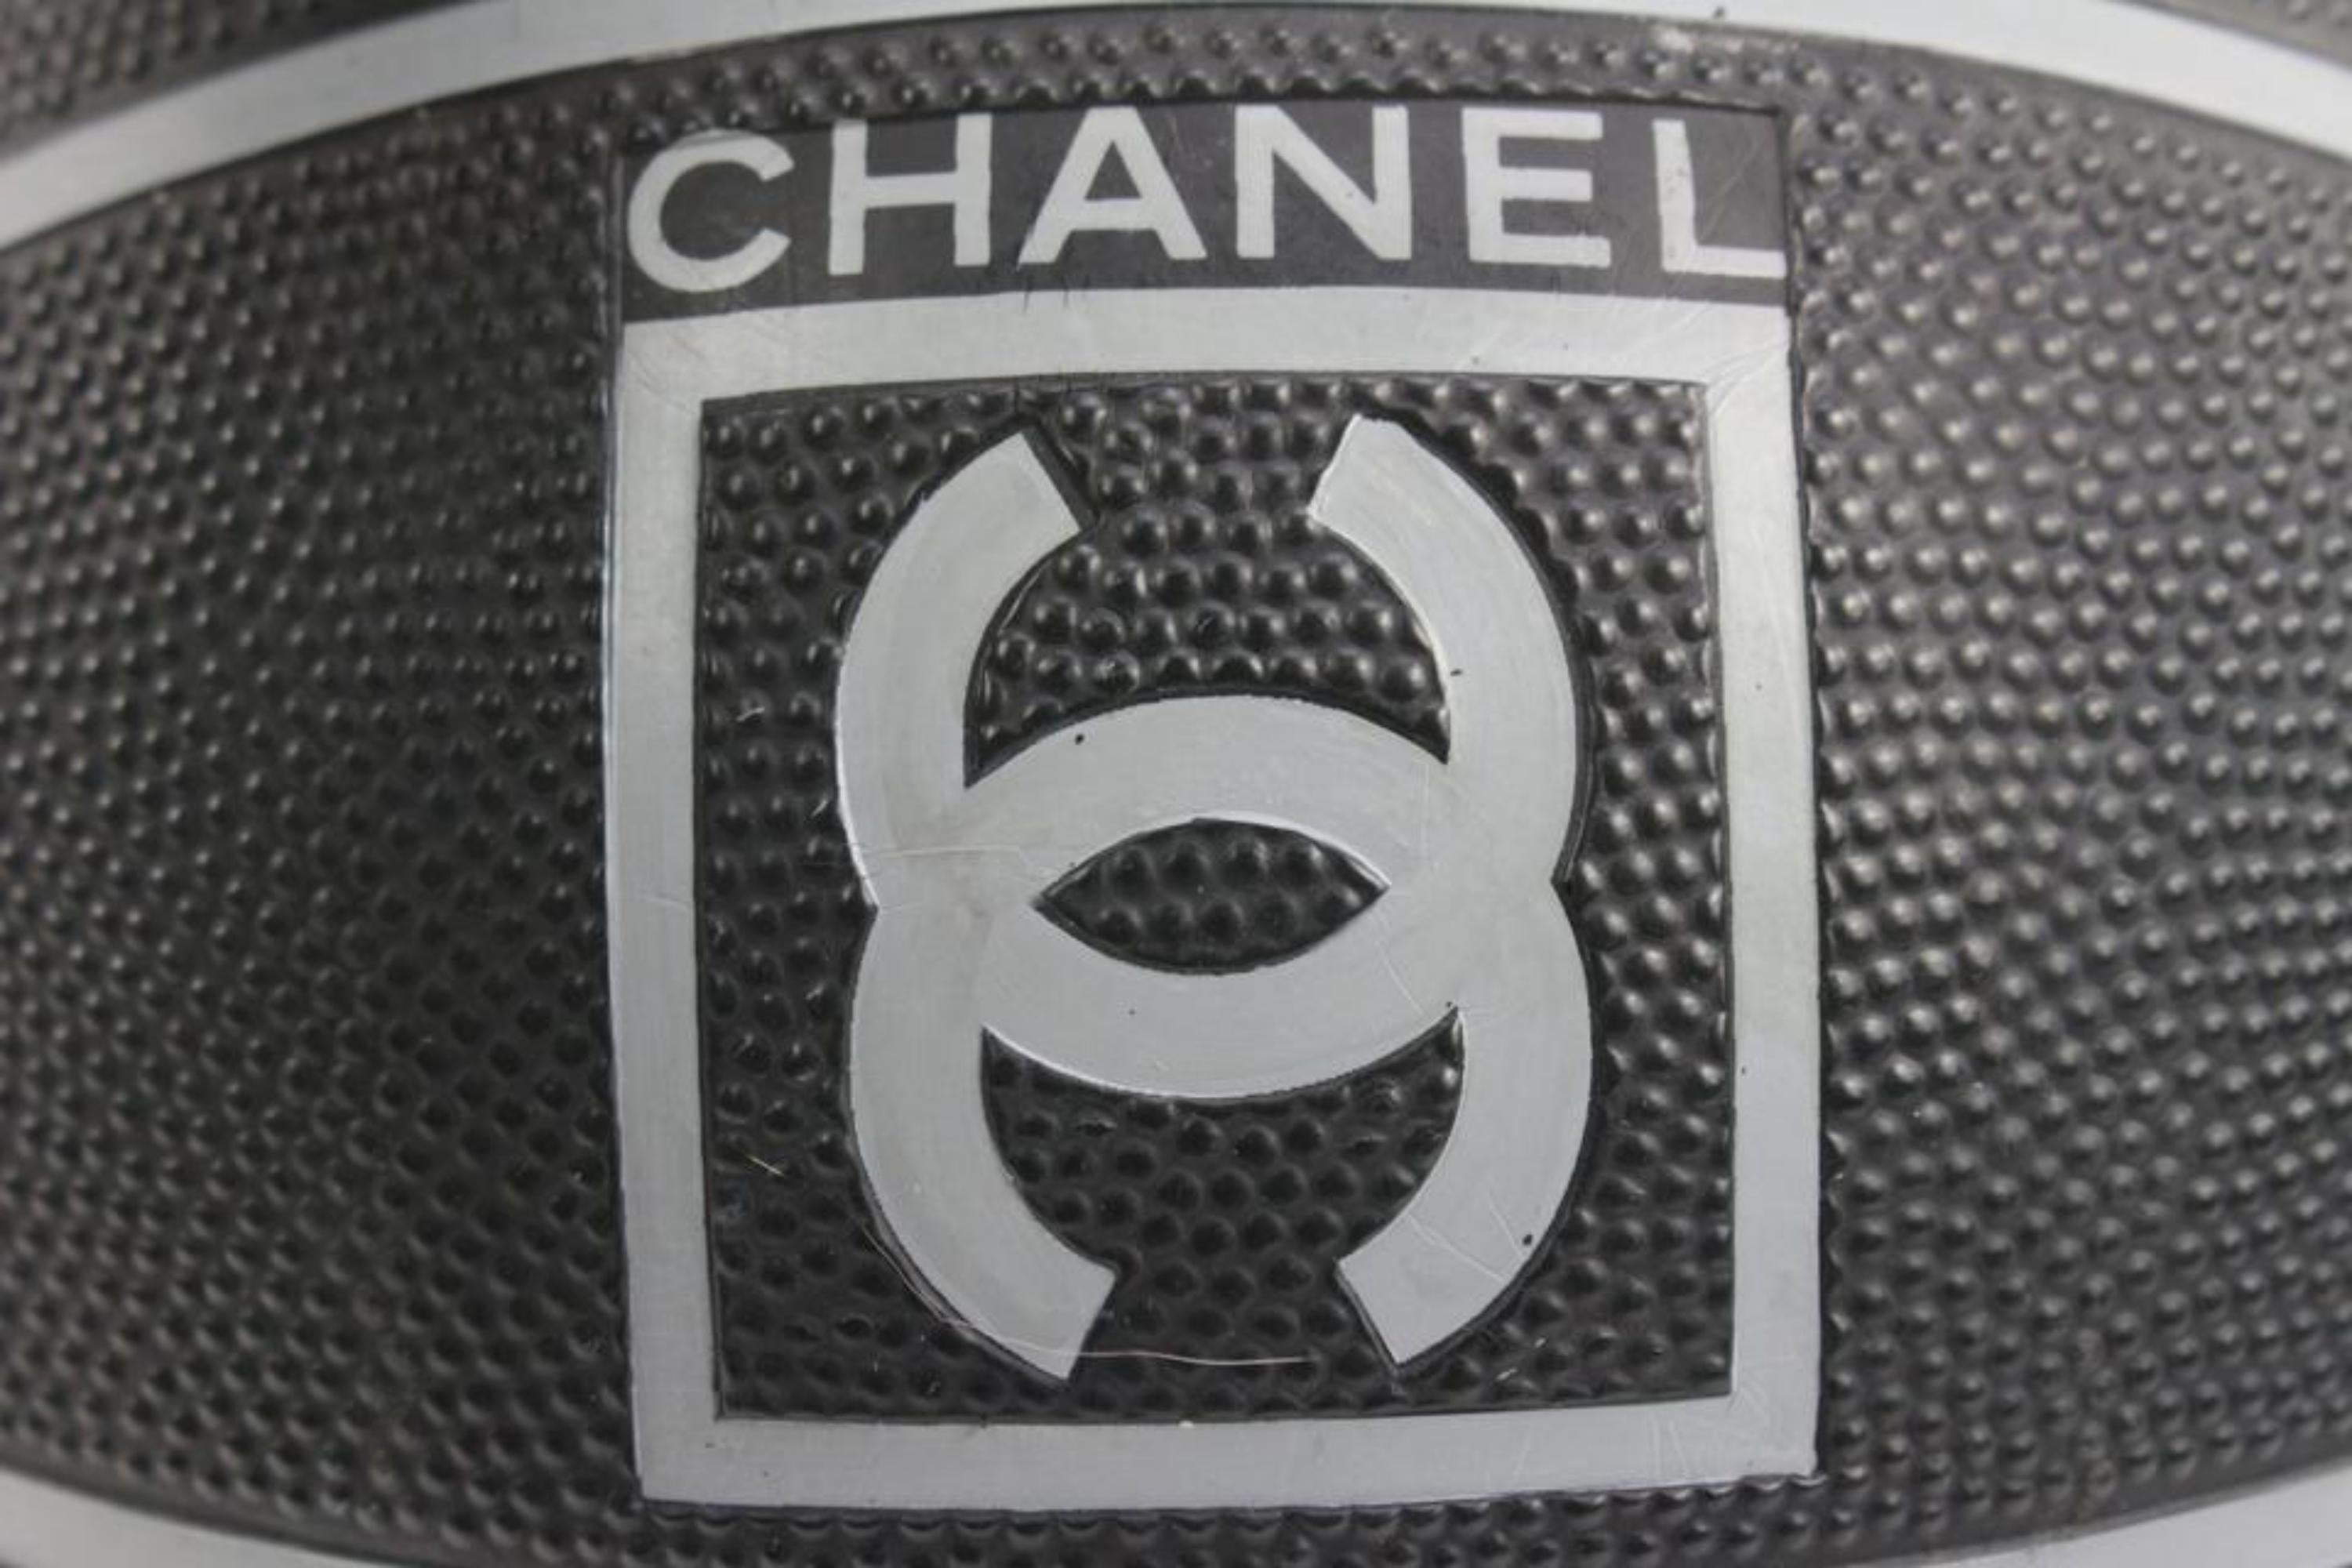 Chanel 04P Black x Grey Sports Logo CC Basketball with Net Bag 6ca126s
Date Code/Serial Number: 04 P
Made In: France
Measurements: Length:  10